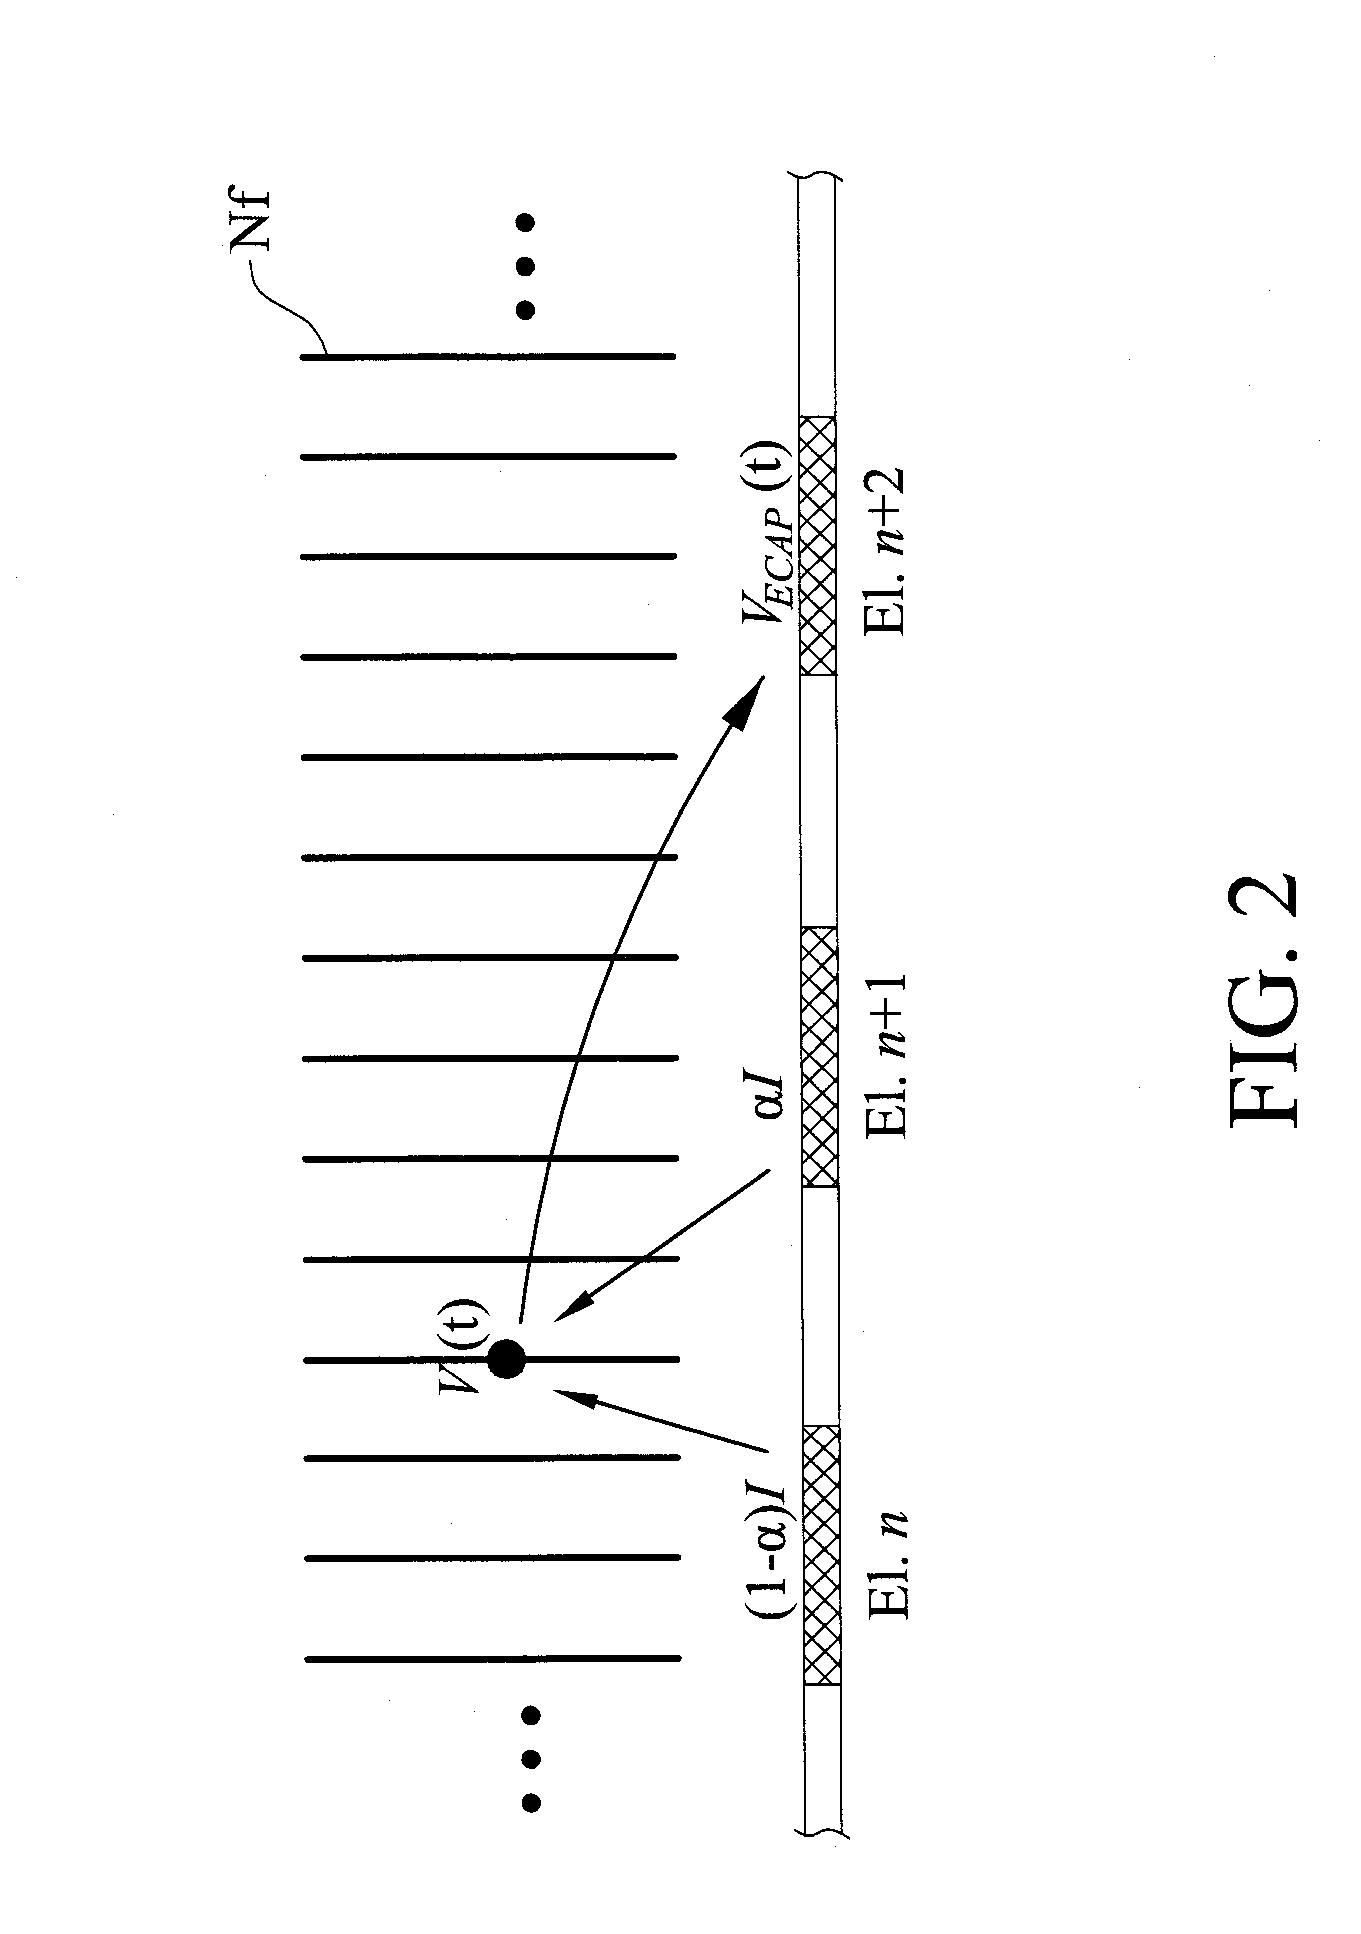 Method for analyzing nerve fiber distribution and measuring normalized evoked compound action electric potential